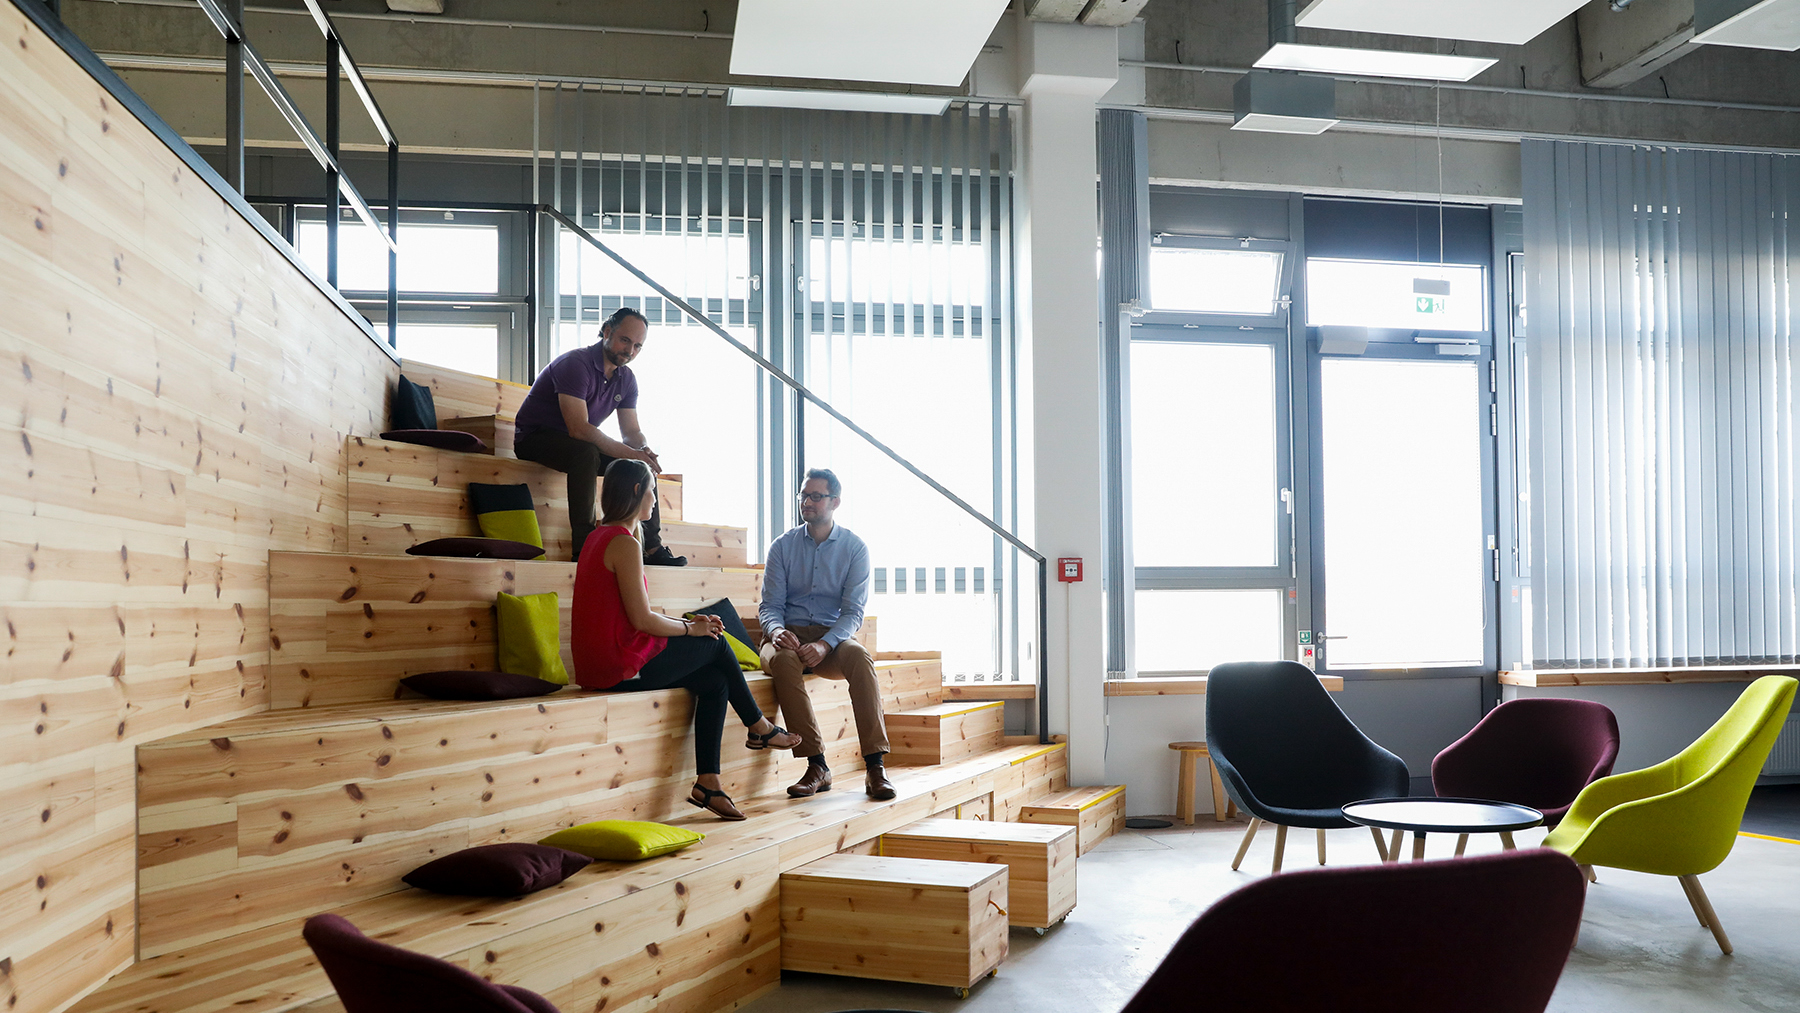 Innovative working environment with wooden steps for colleagues to chat on